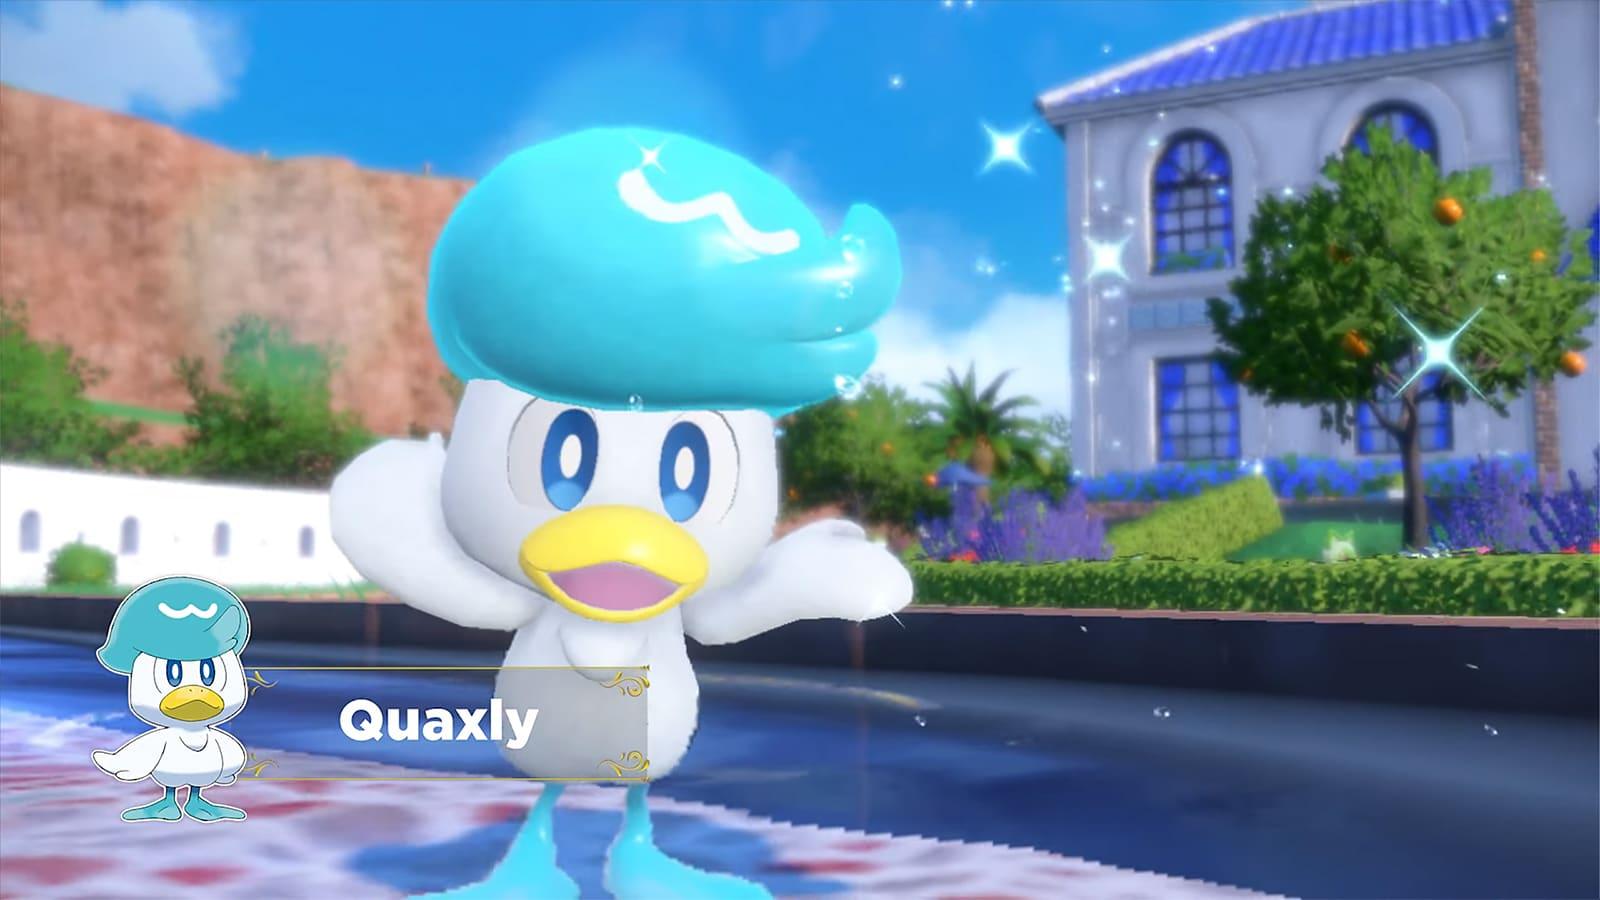 An image of Quaxly, a water type Pokemon.